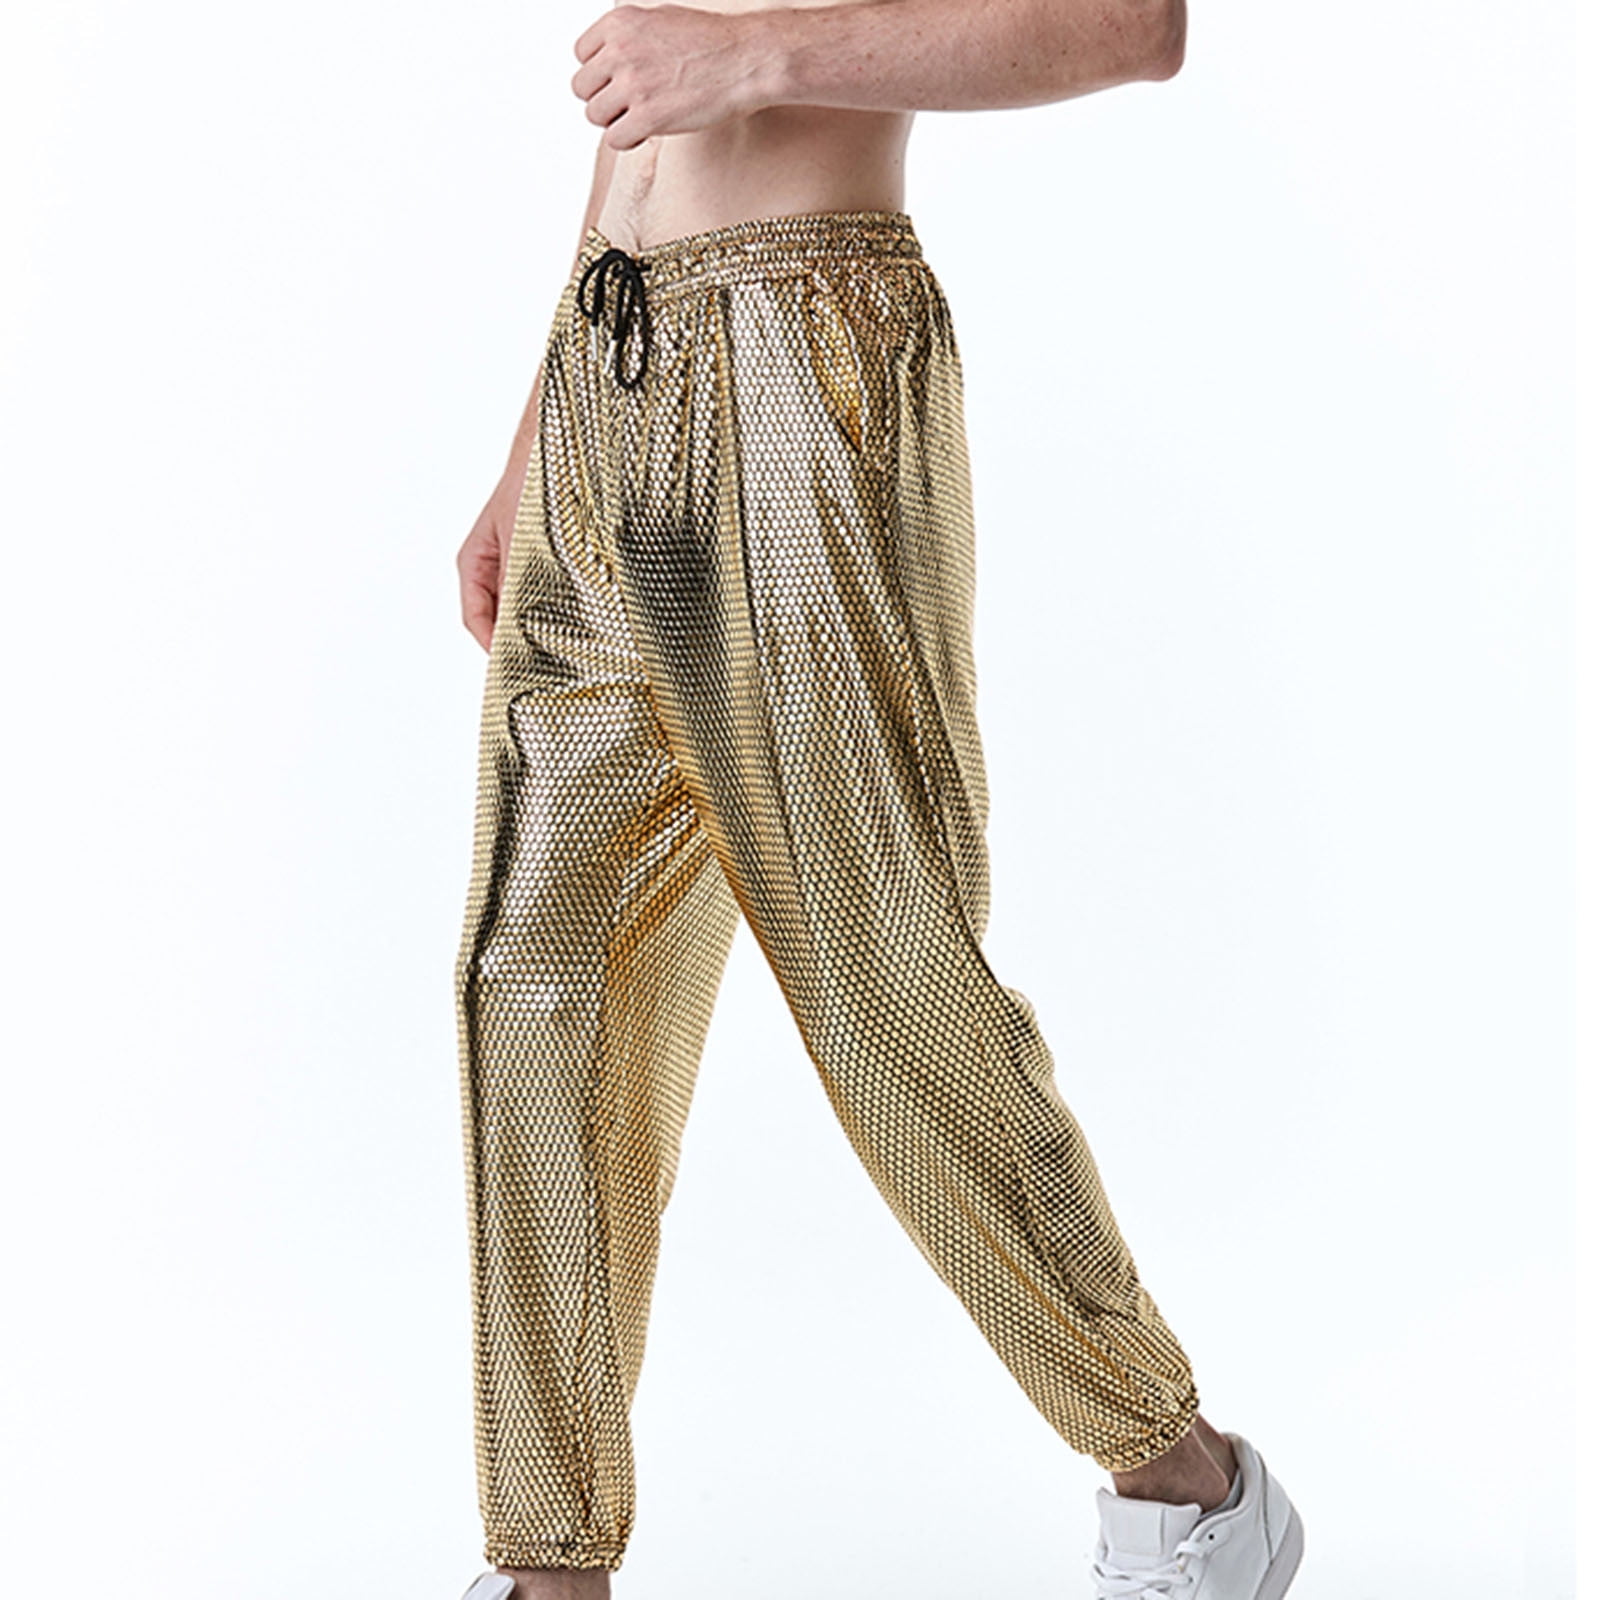 Clothes Spring 2024,AXXD Lace-Up Elasticated Print Track Pants Drawstring  Trousers Clearances Joggers Pants Size 10 12 Gold 4